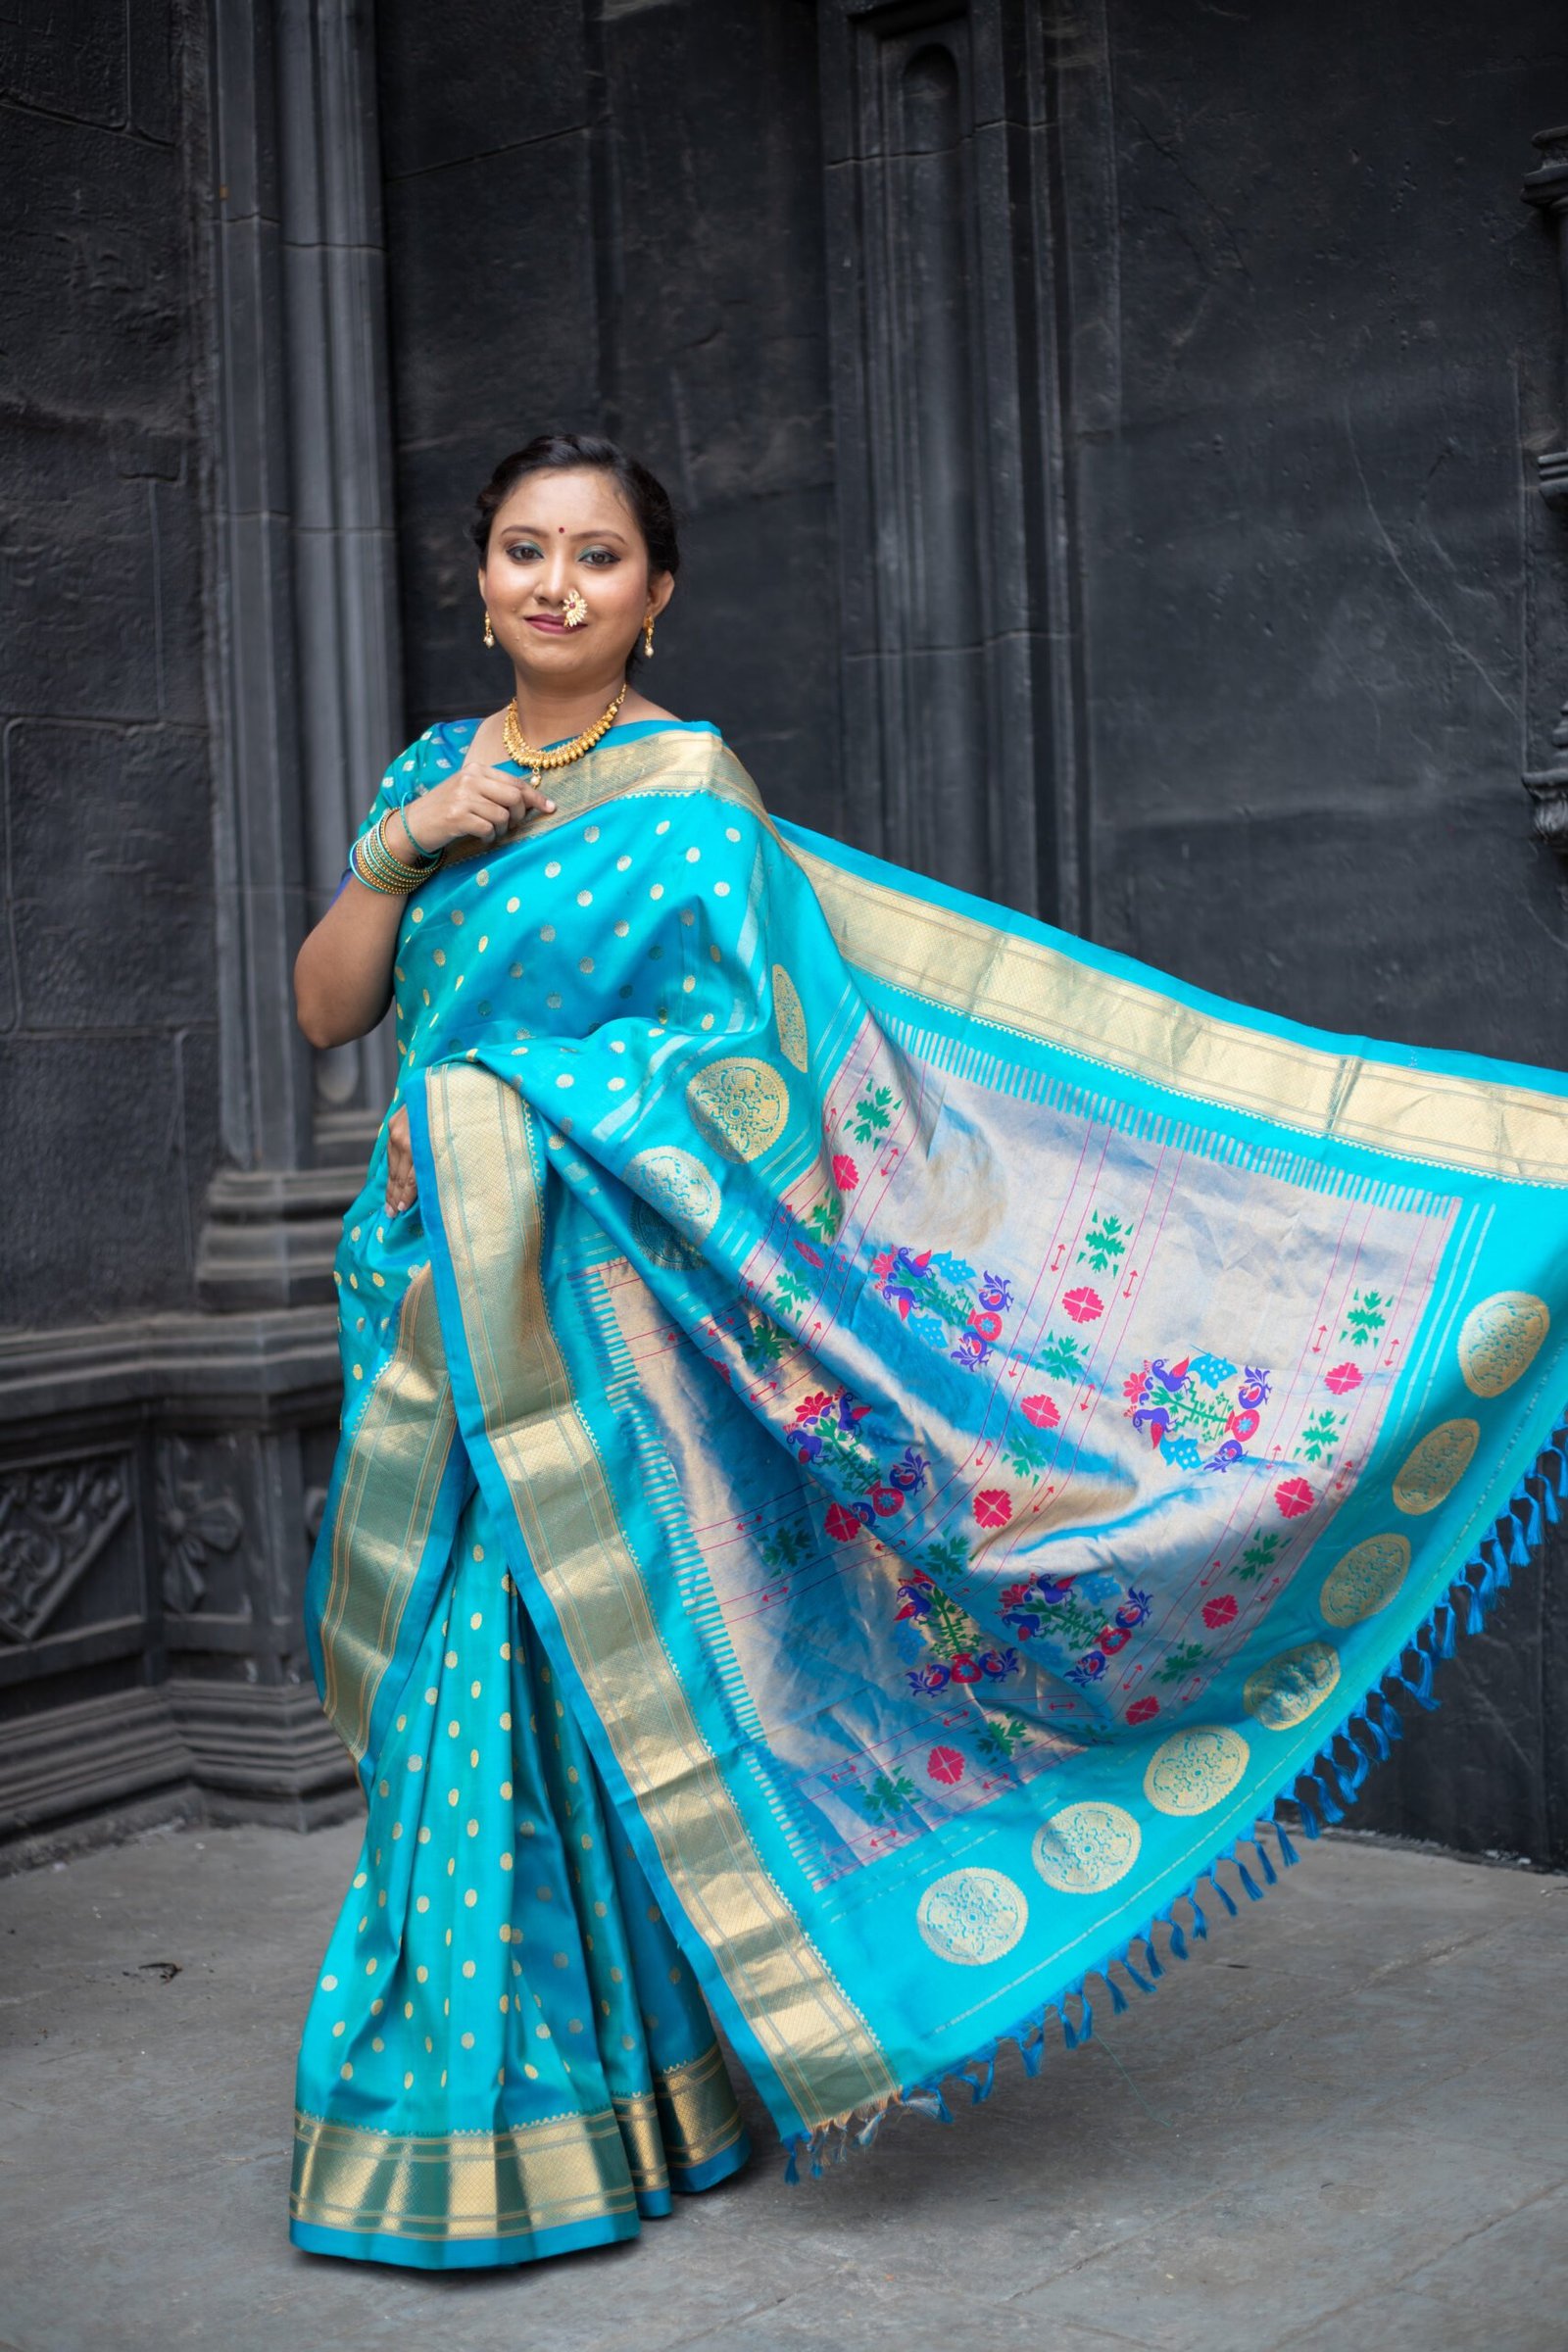 Best Seller Sarees for Any Occasion|Best Seller Sarees|Suta